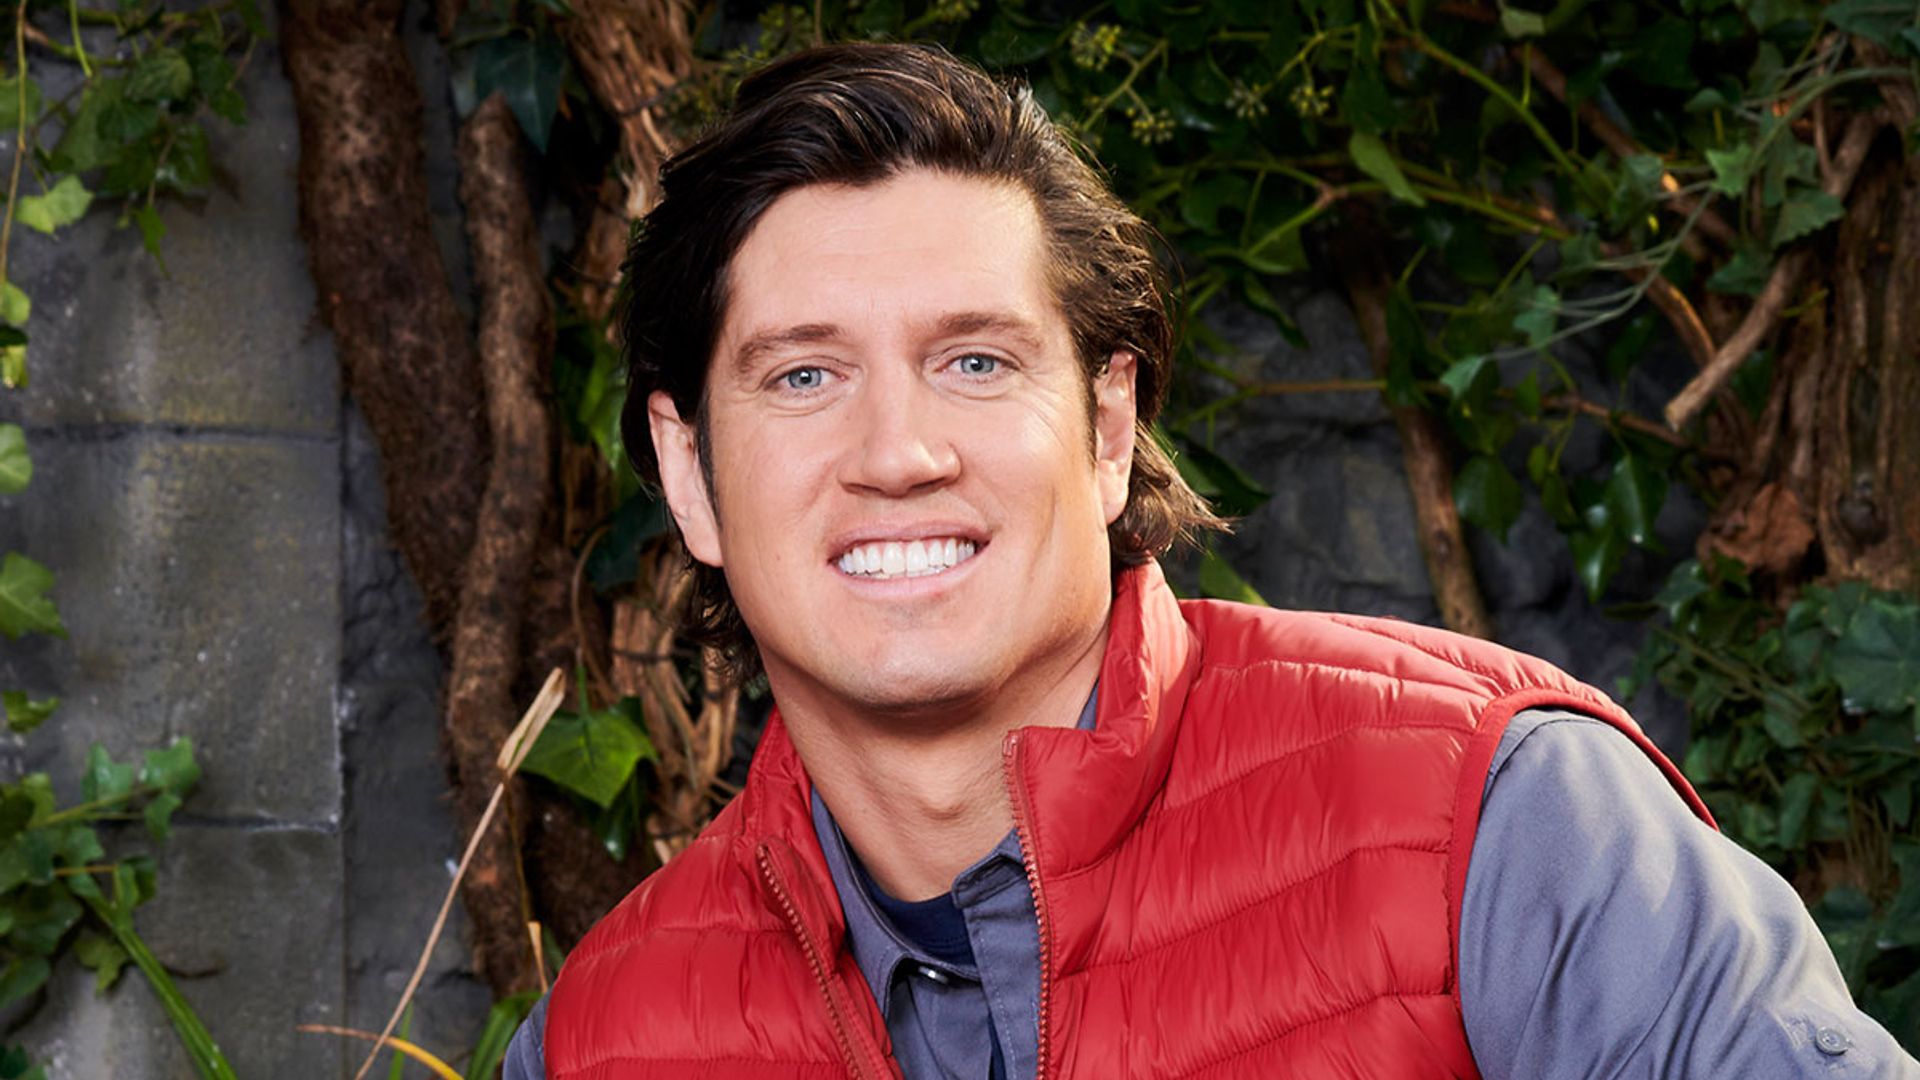 Vernon Kay reveals the touching reason he joined I'm a Celebrity